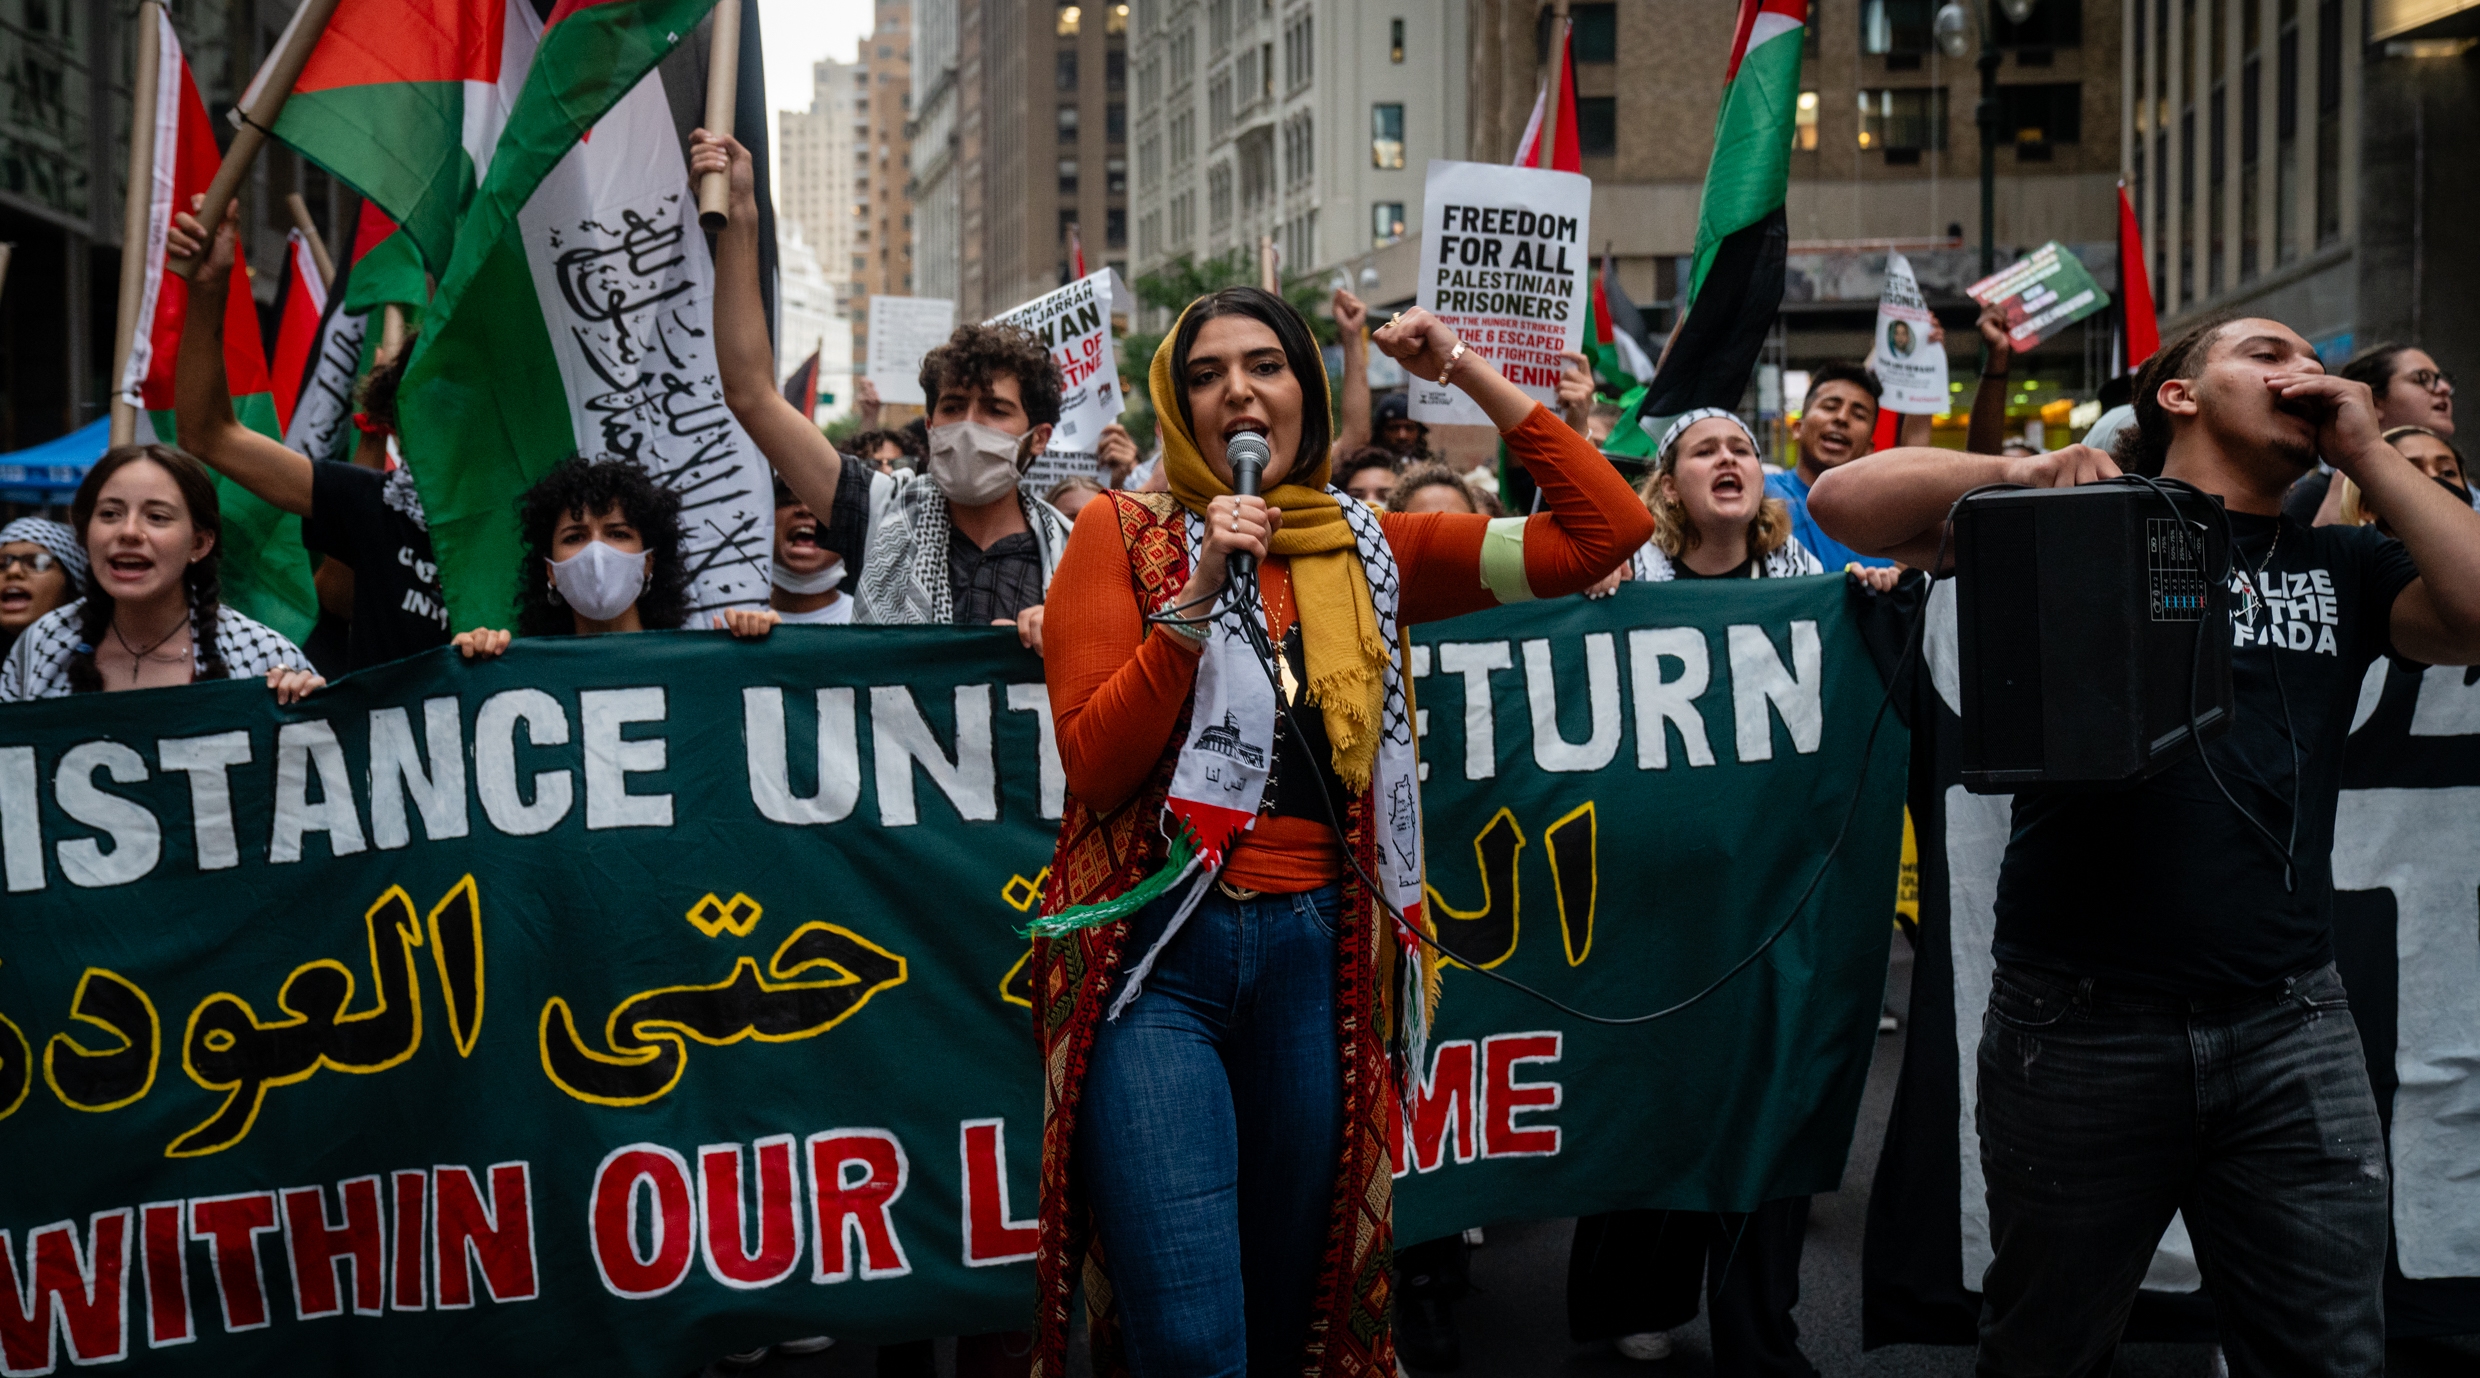 Nerdeen Kiswani, the leader of Within Our Lifetime, at a protest in Manhattan on September 17, 2021. (Luke Tress)